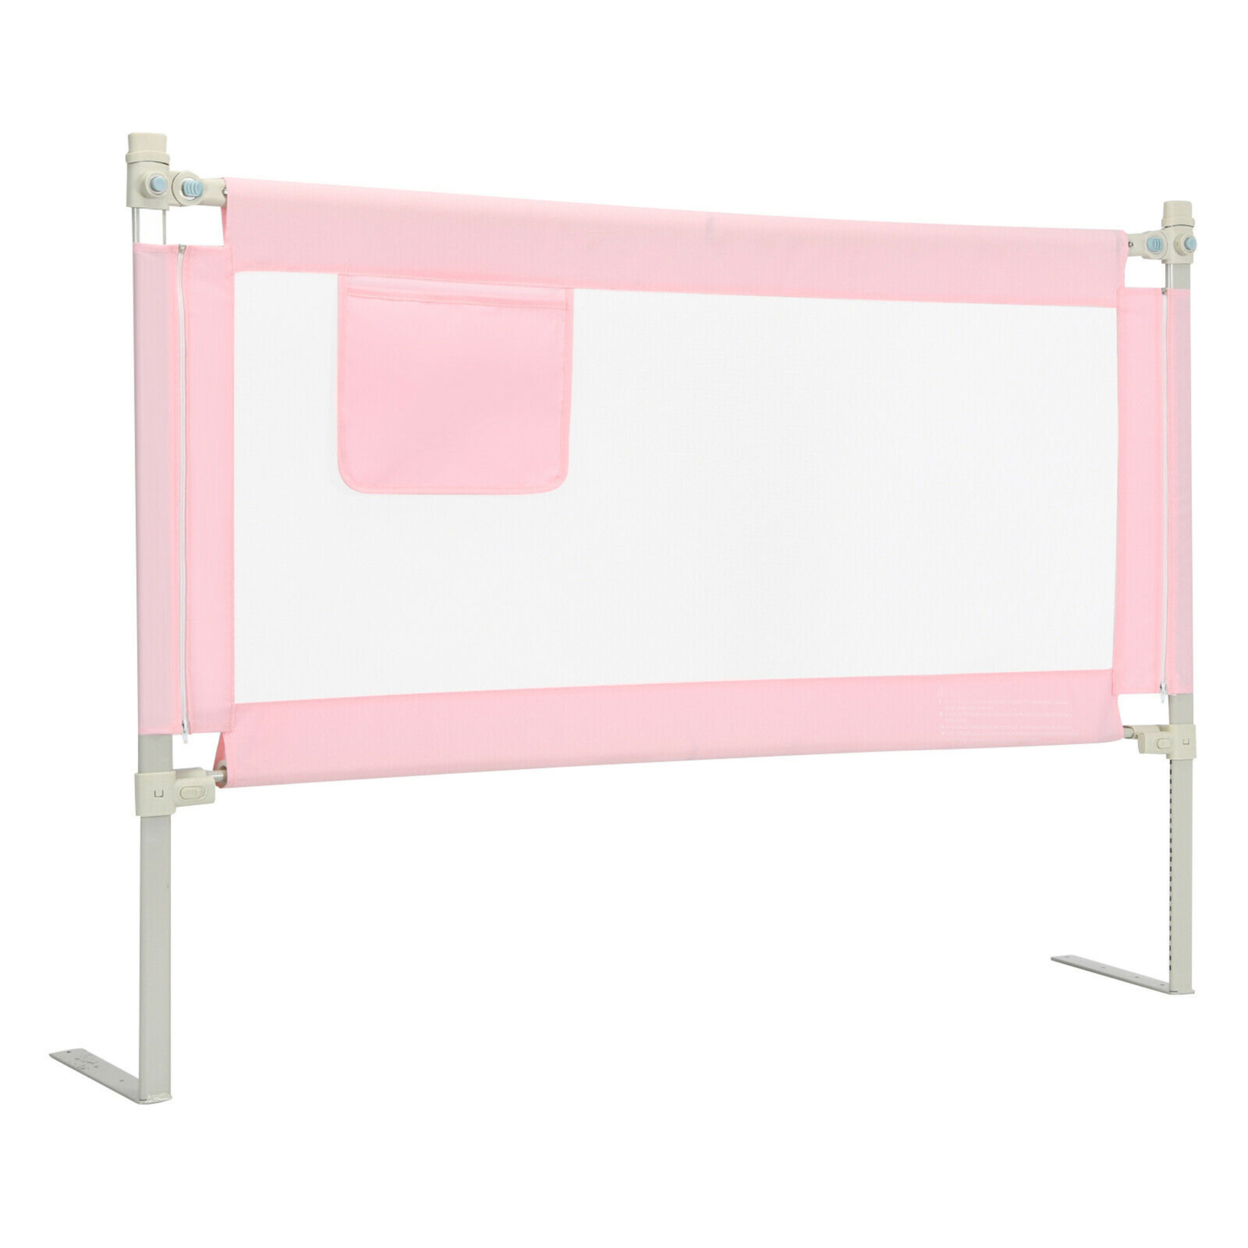 57'' Bed Rails For Toddlers Vertical Lifting Baby Bed Rail Guard With Lock Grey / Blue / Pink - Pink